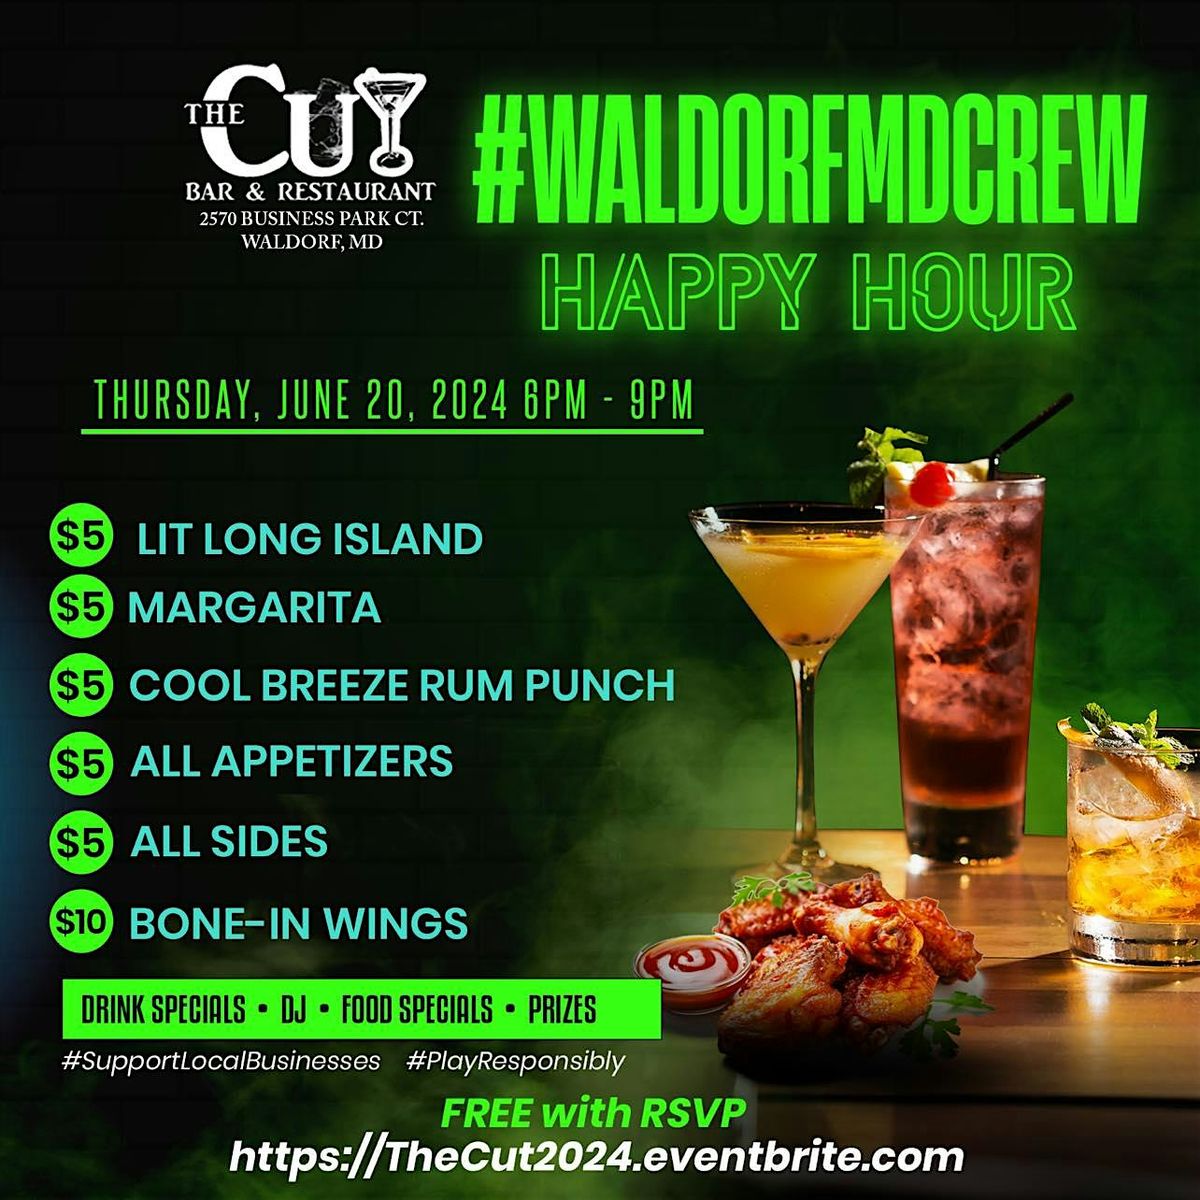 Let's Cut Up at The Cut   #WaldorfMDCrew Happy Hour